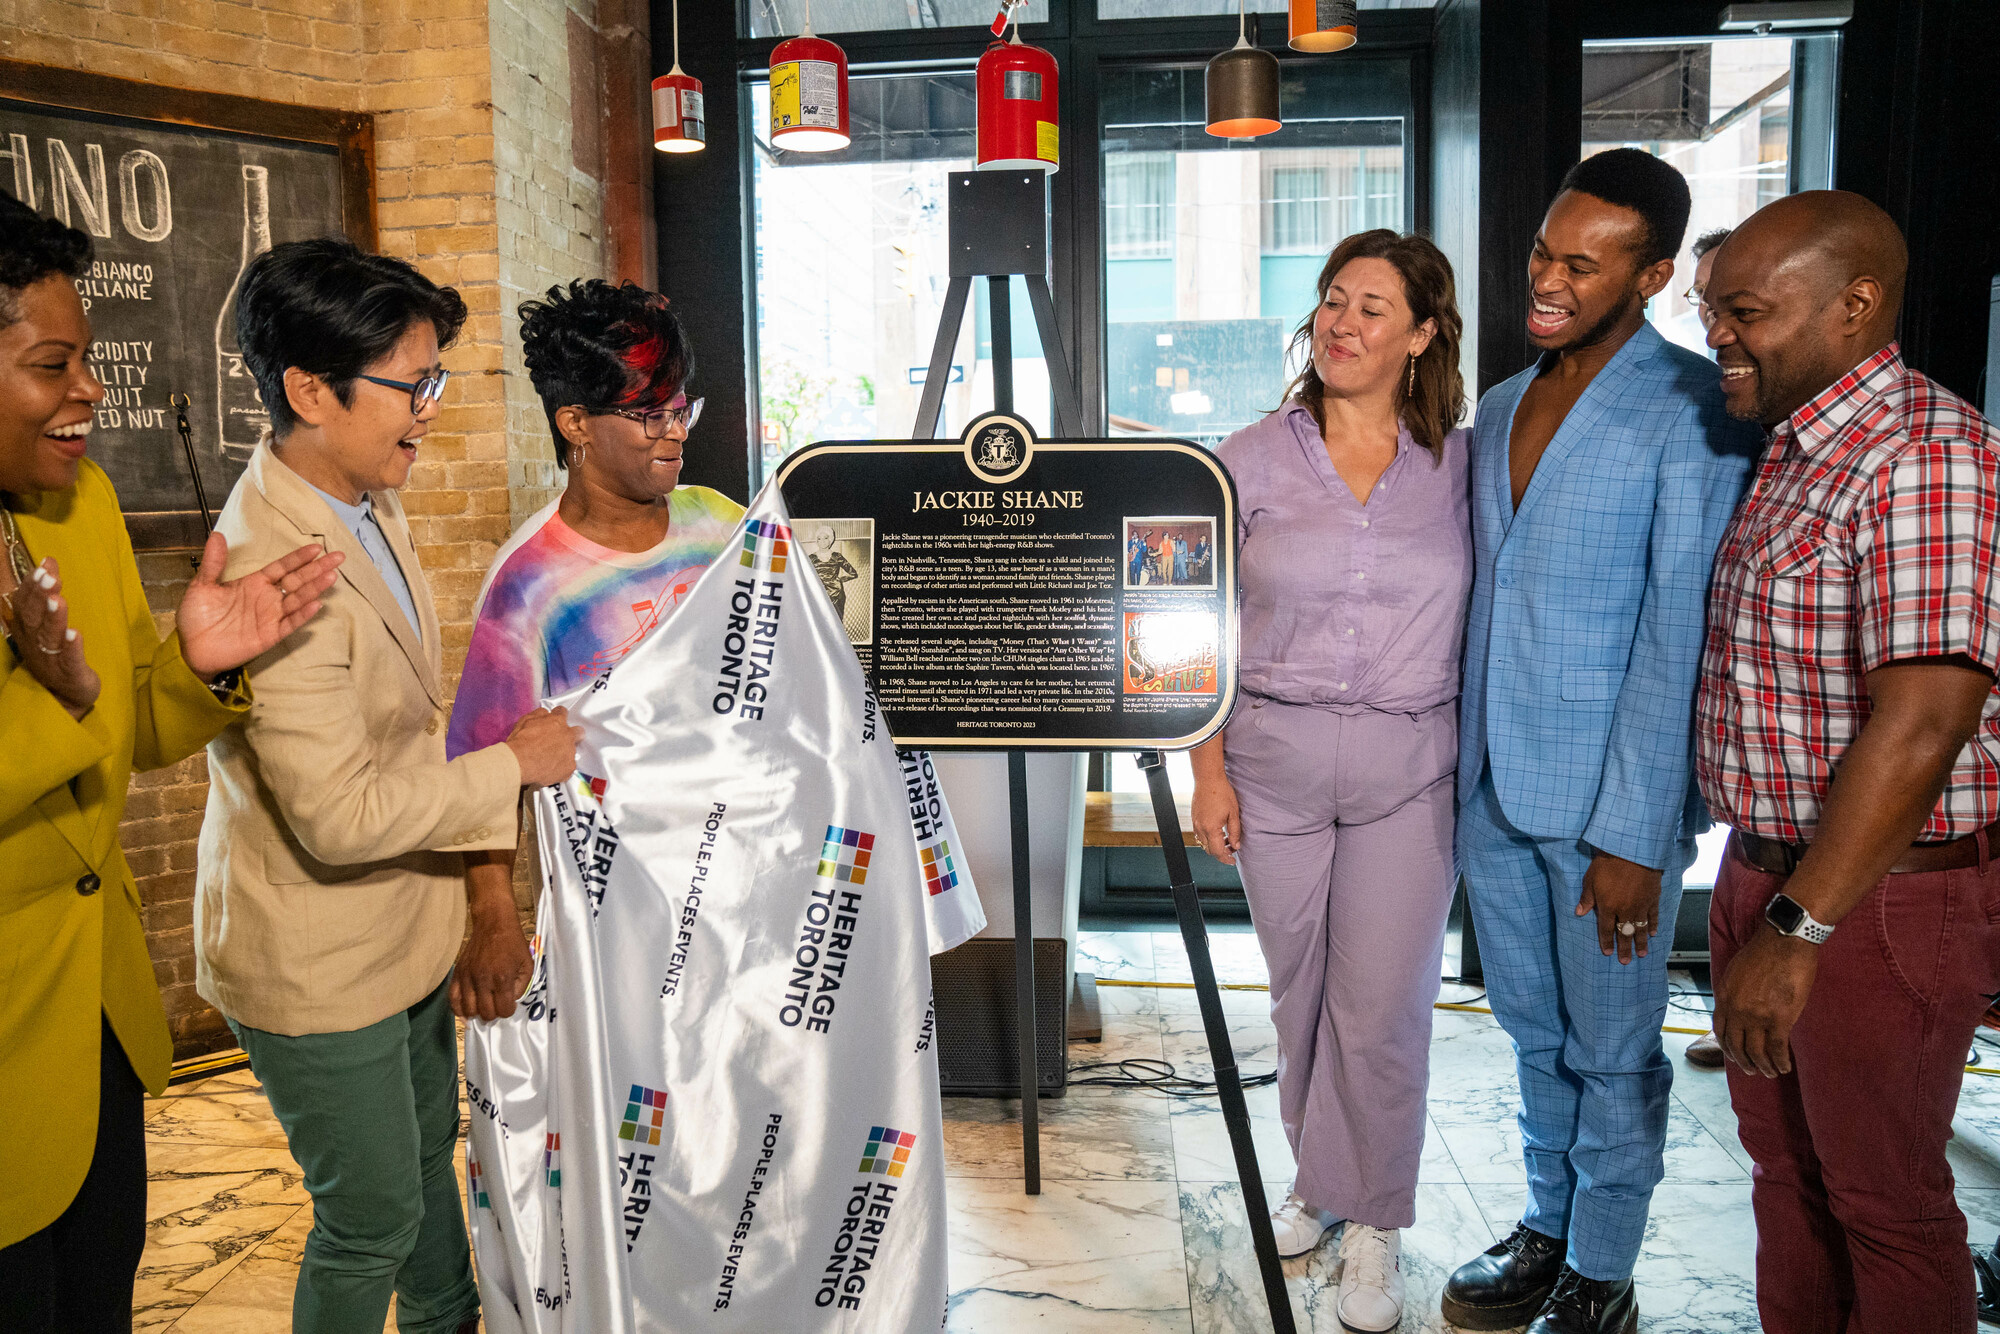 Image of six people smiling after unveiling a plaque commemorating the singer Jackie Shane.